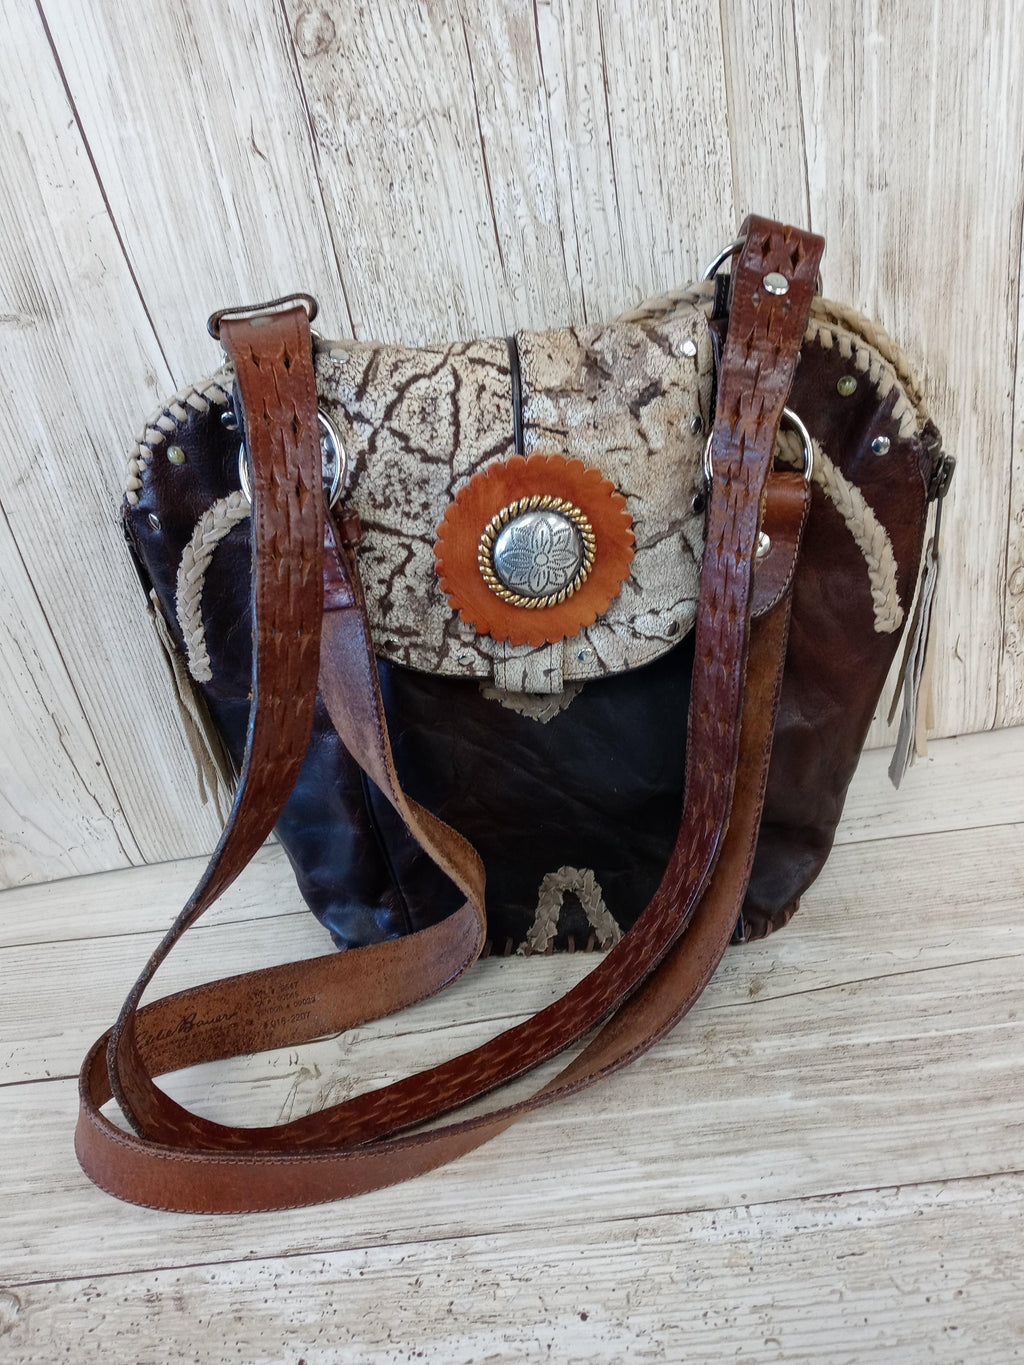 Cowboy Boot Purse - Western Leather Purse – Handmade Leather Purse - DB316 cowboy boot purses, western fringe purse, handmade leather purses, boot purse, handmade western purse, custom leather handbags Chris Thompson Bags